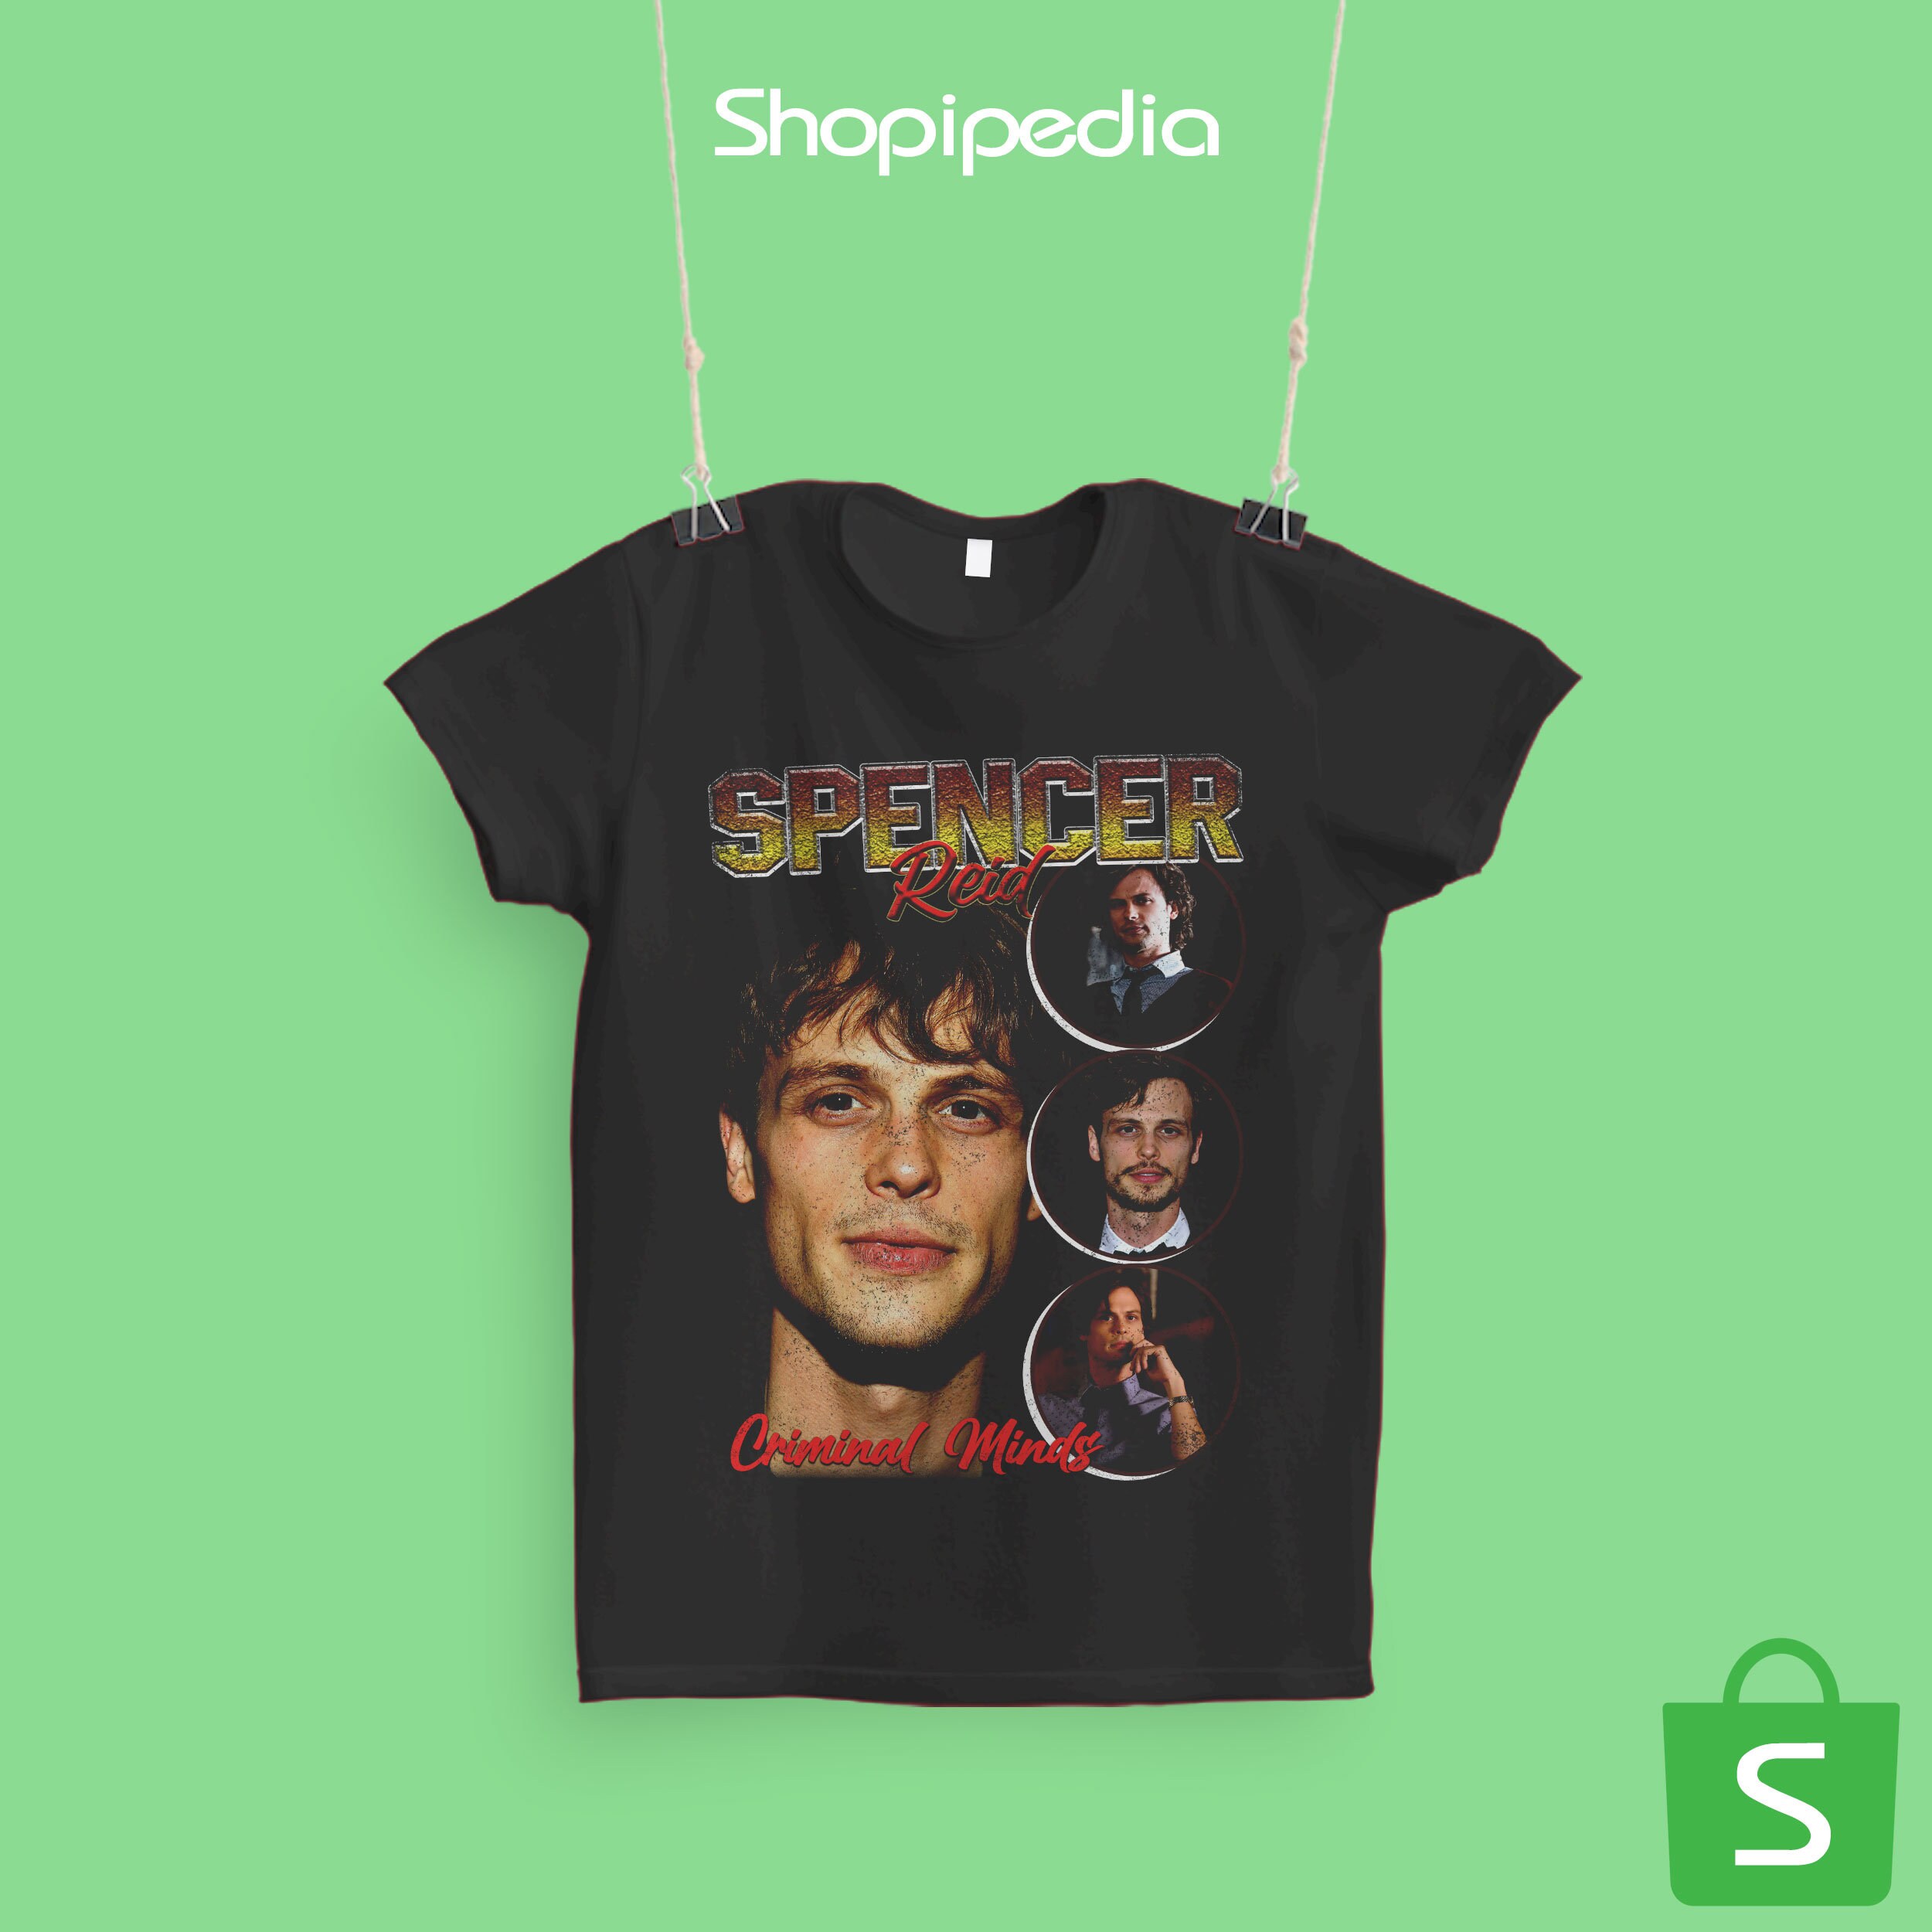 Matthew gray gubler spencer reid shirt initial name and born year tee vintage scratch old polaroid photo pop album cover style fn t-shirt